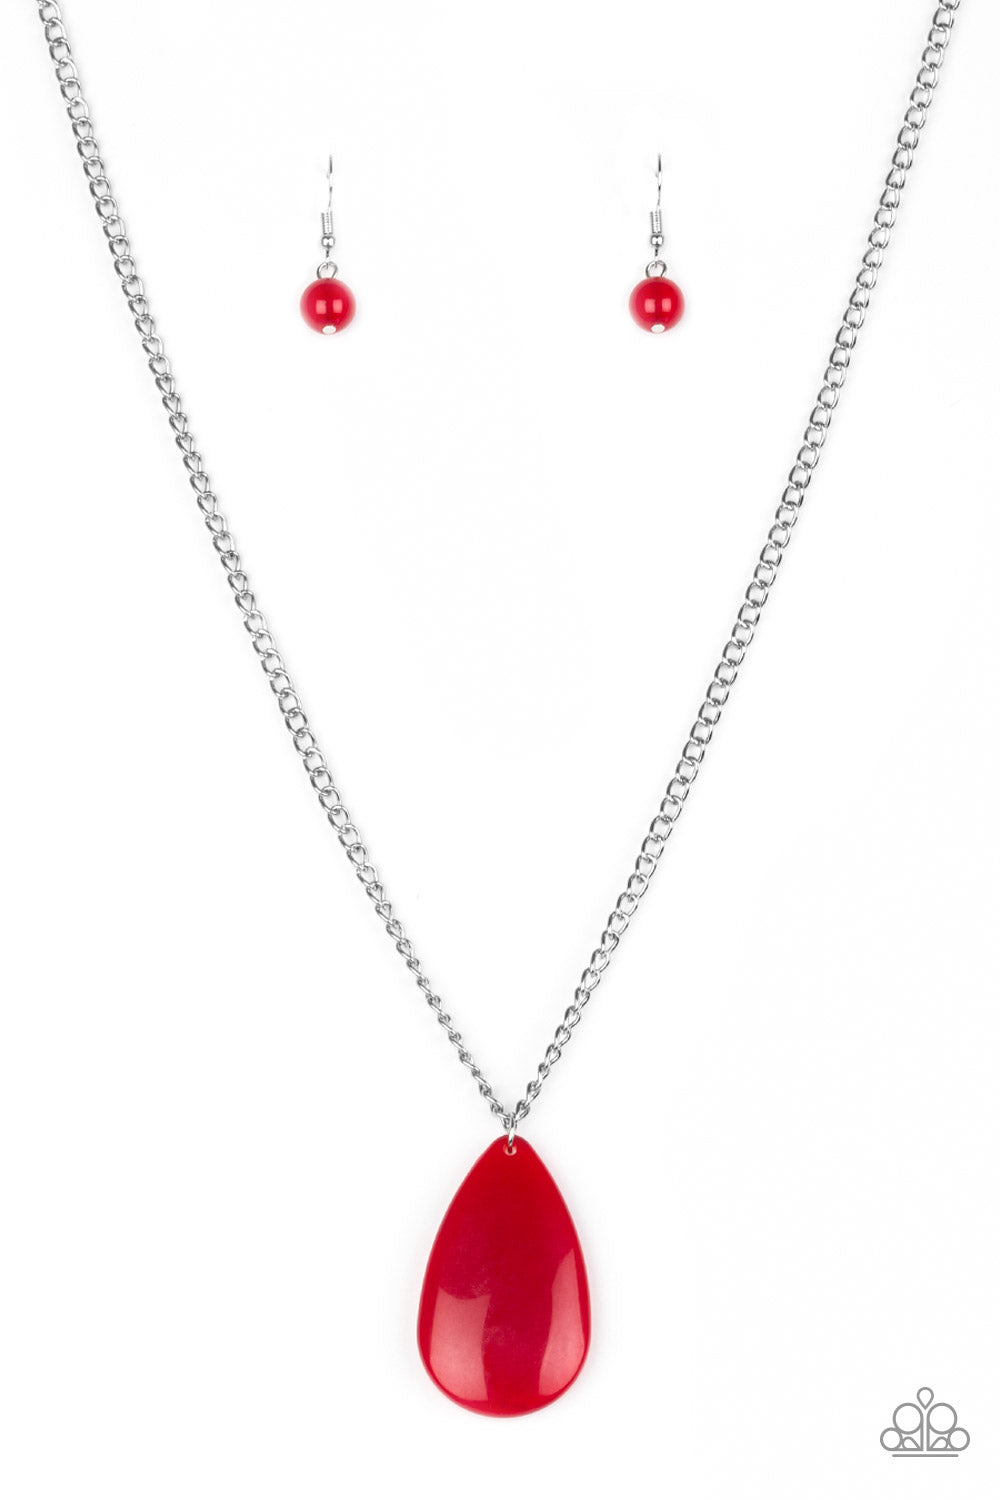 So Pop-YOU-lar - Red Necklace